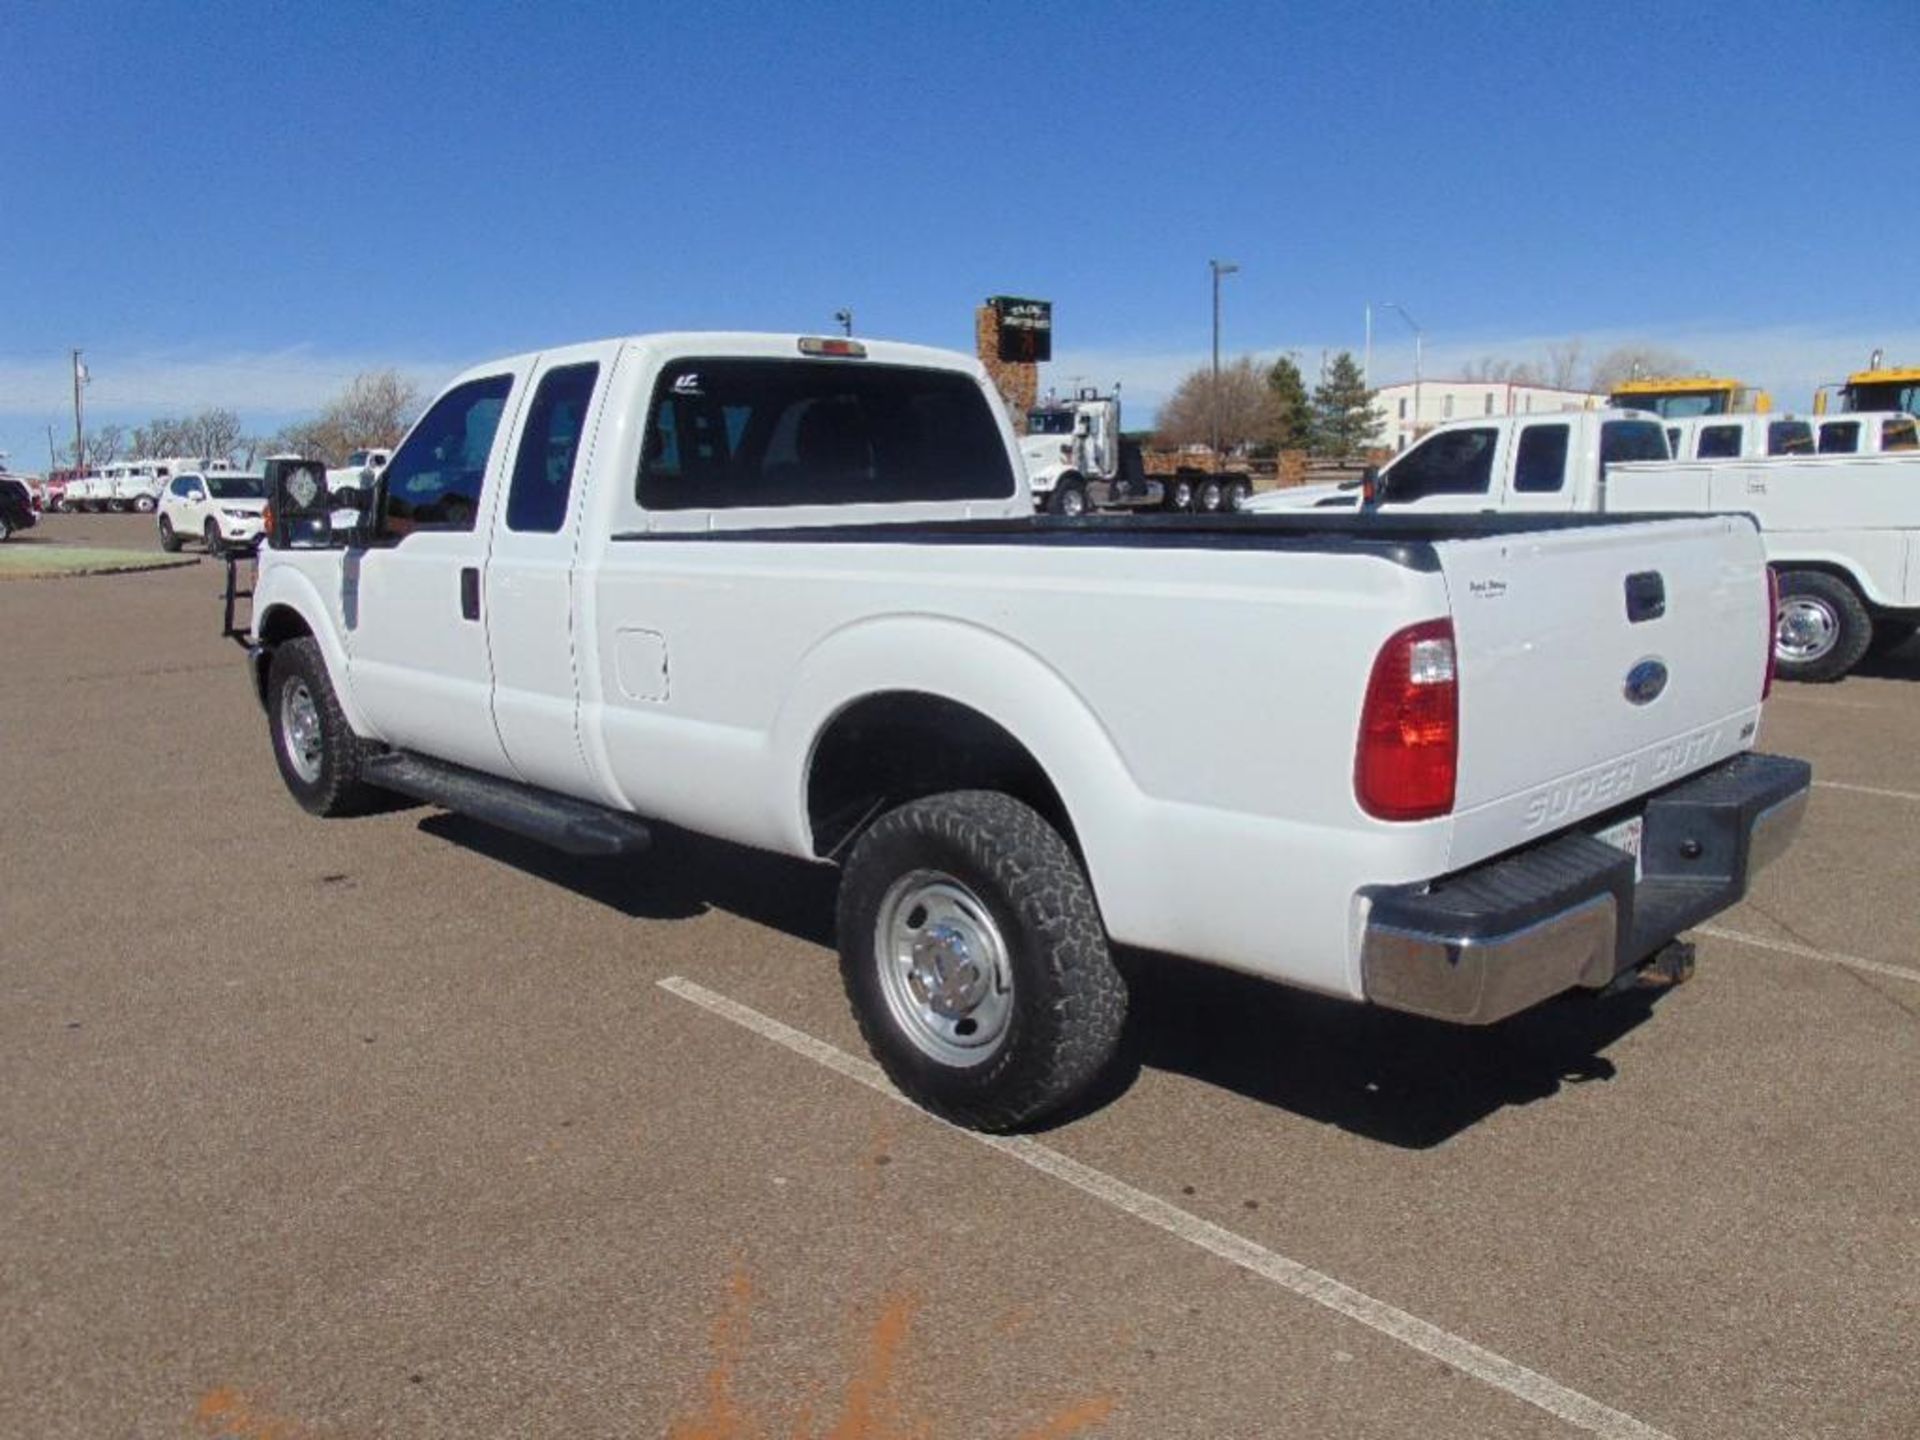 2011 Ford F250 ext cab Pickup s/n 1ft7x2a6xbec95350, v8 gas eng,auto trans, od reads 241498 miles - Image 2 of 3